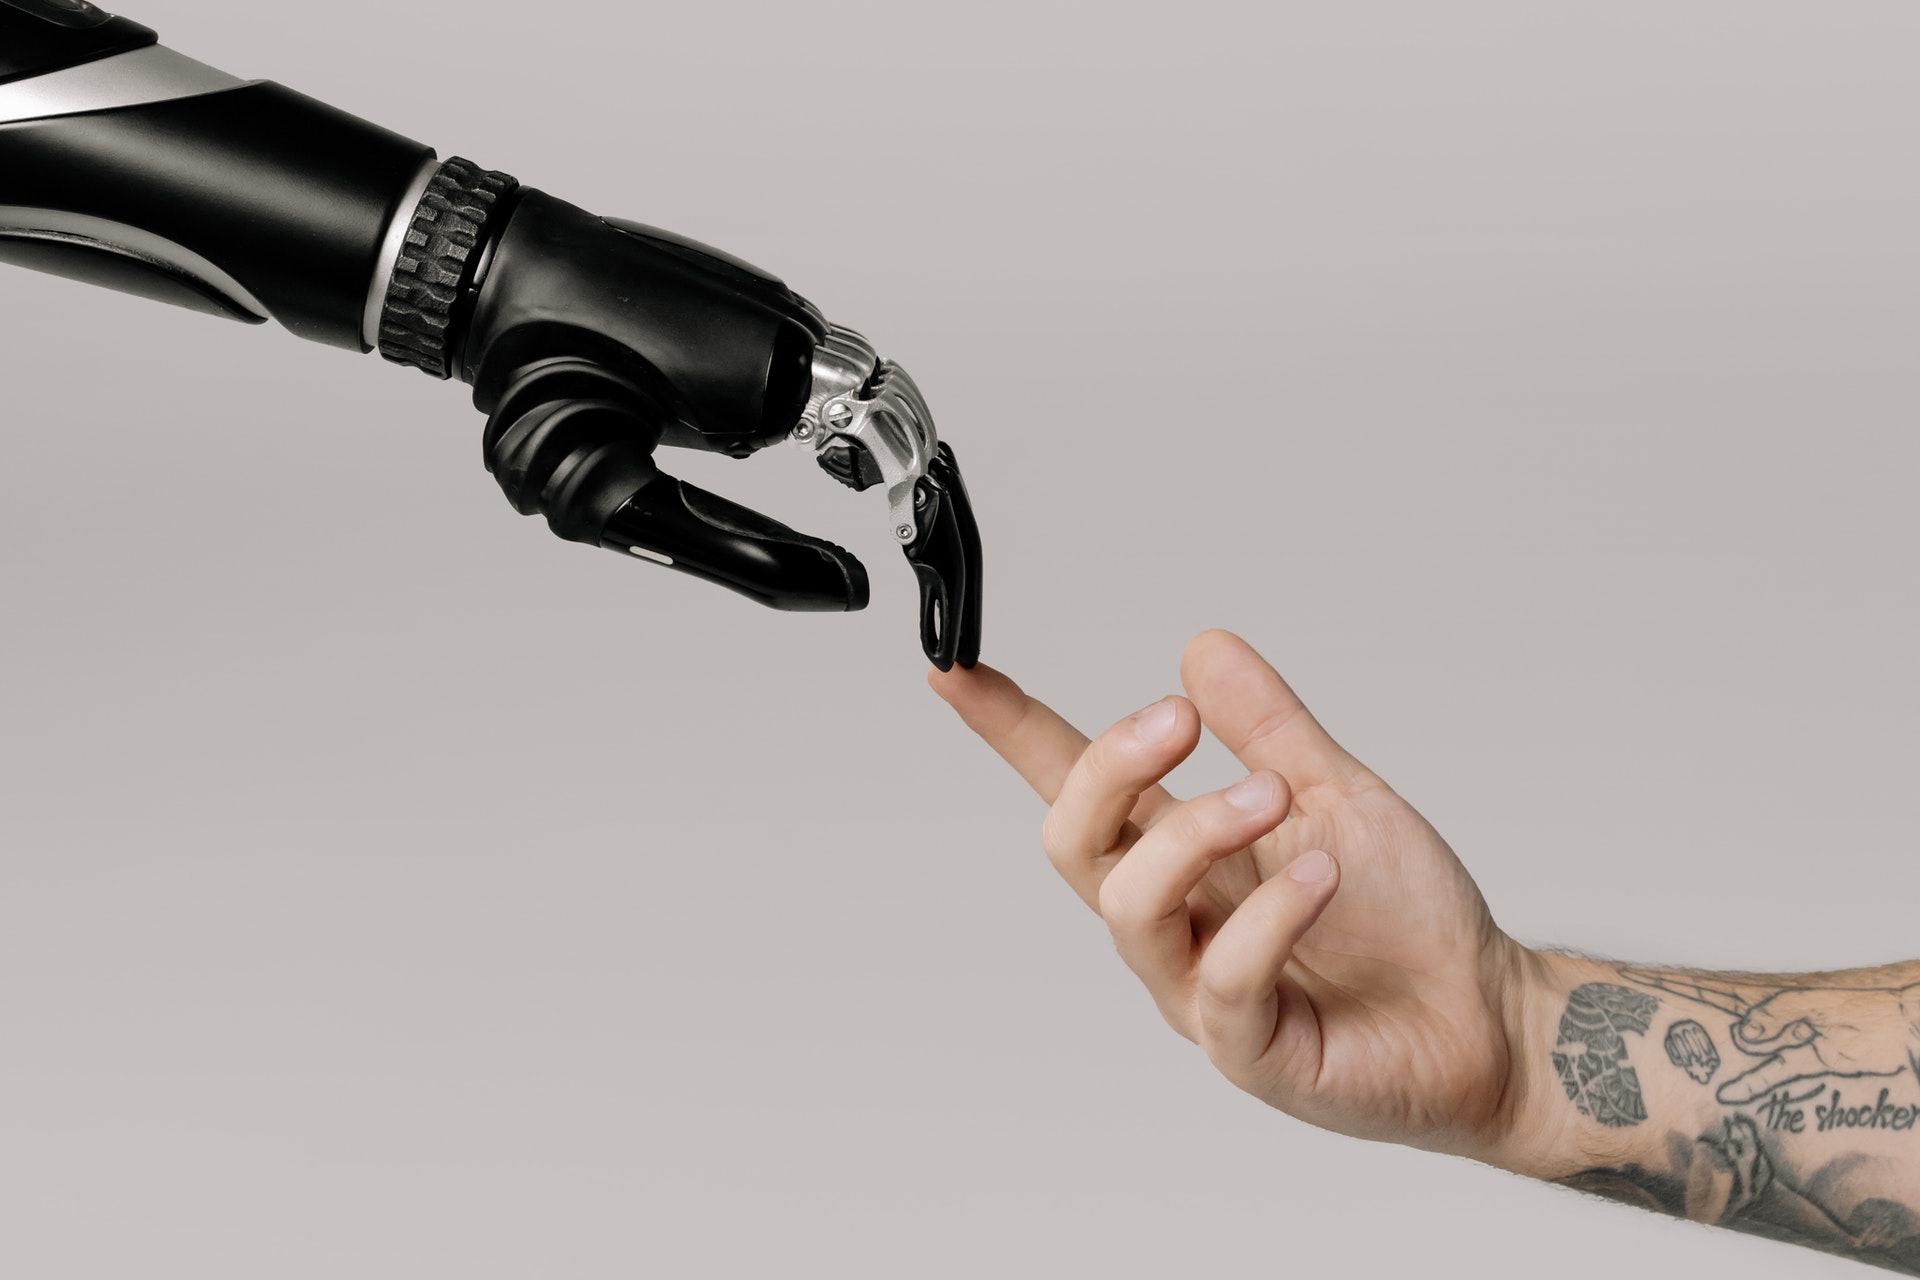 Crazy French Artist Gets Prosthetic Arm That’s A Tattoos Machine